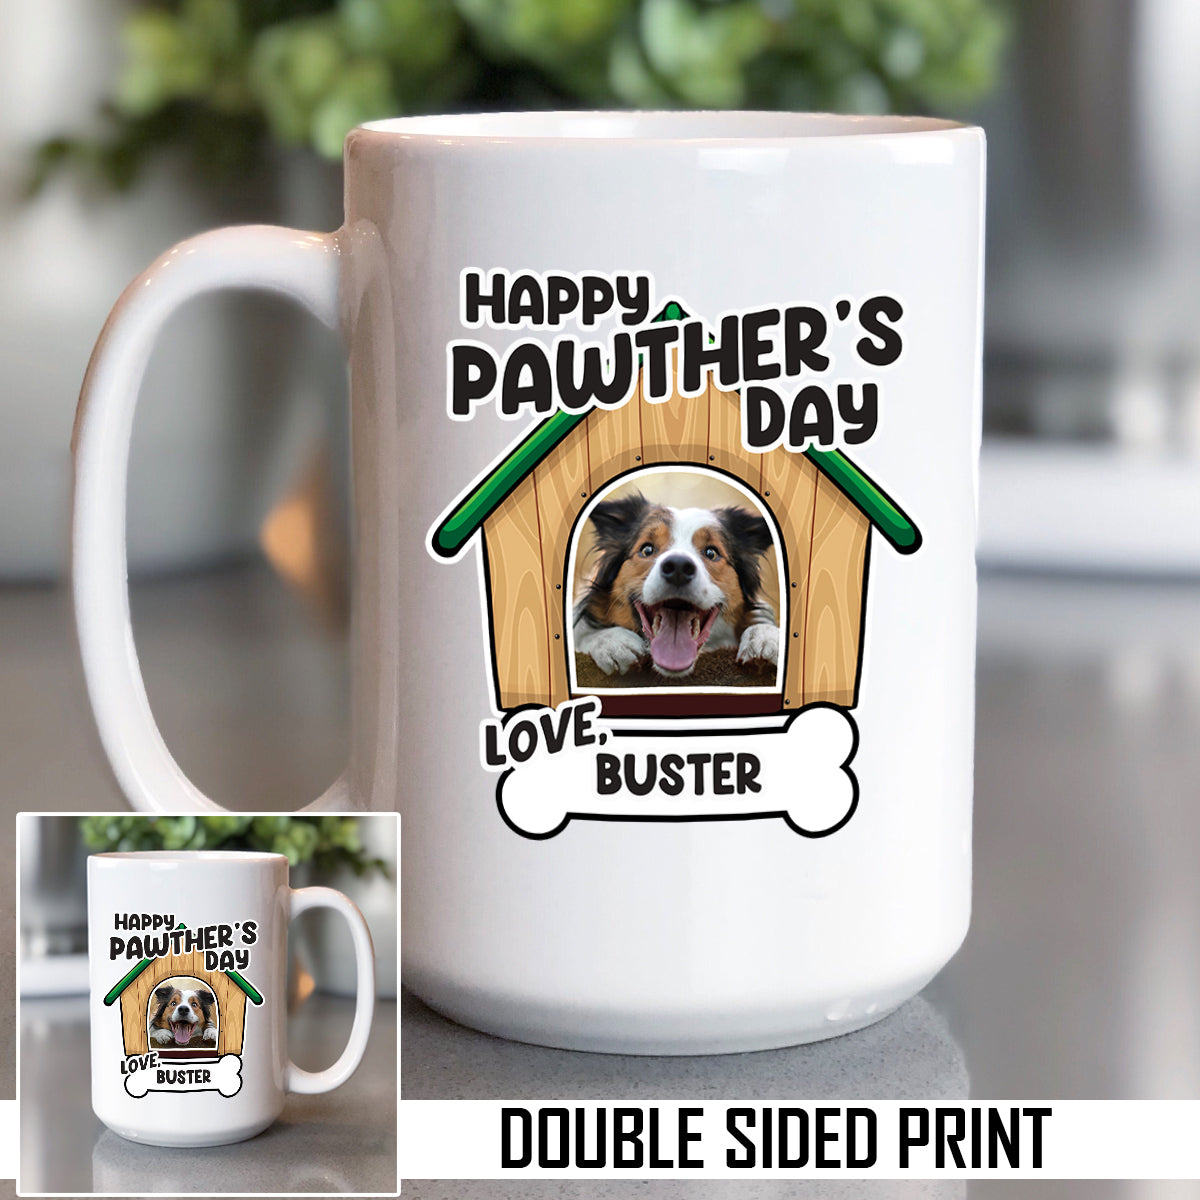 Happy Pawther's Day Personalized Double Sided Print Mug